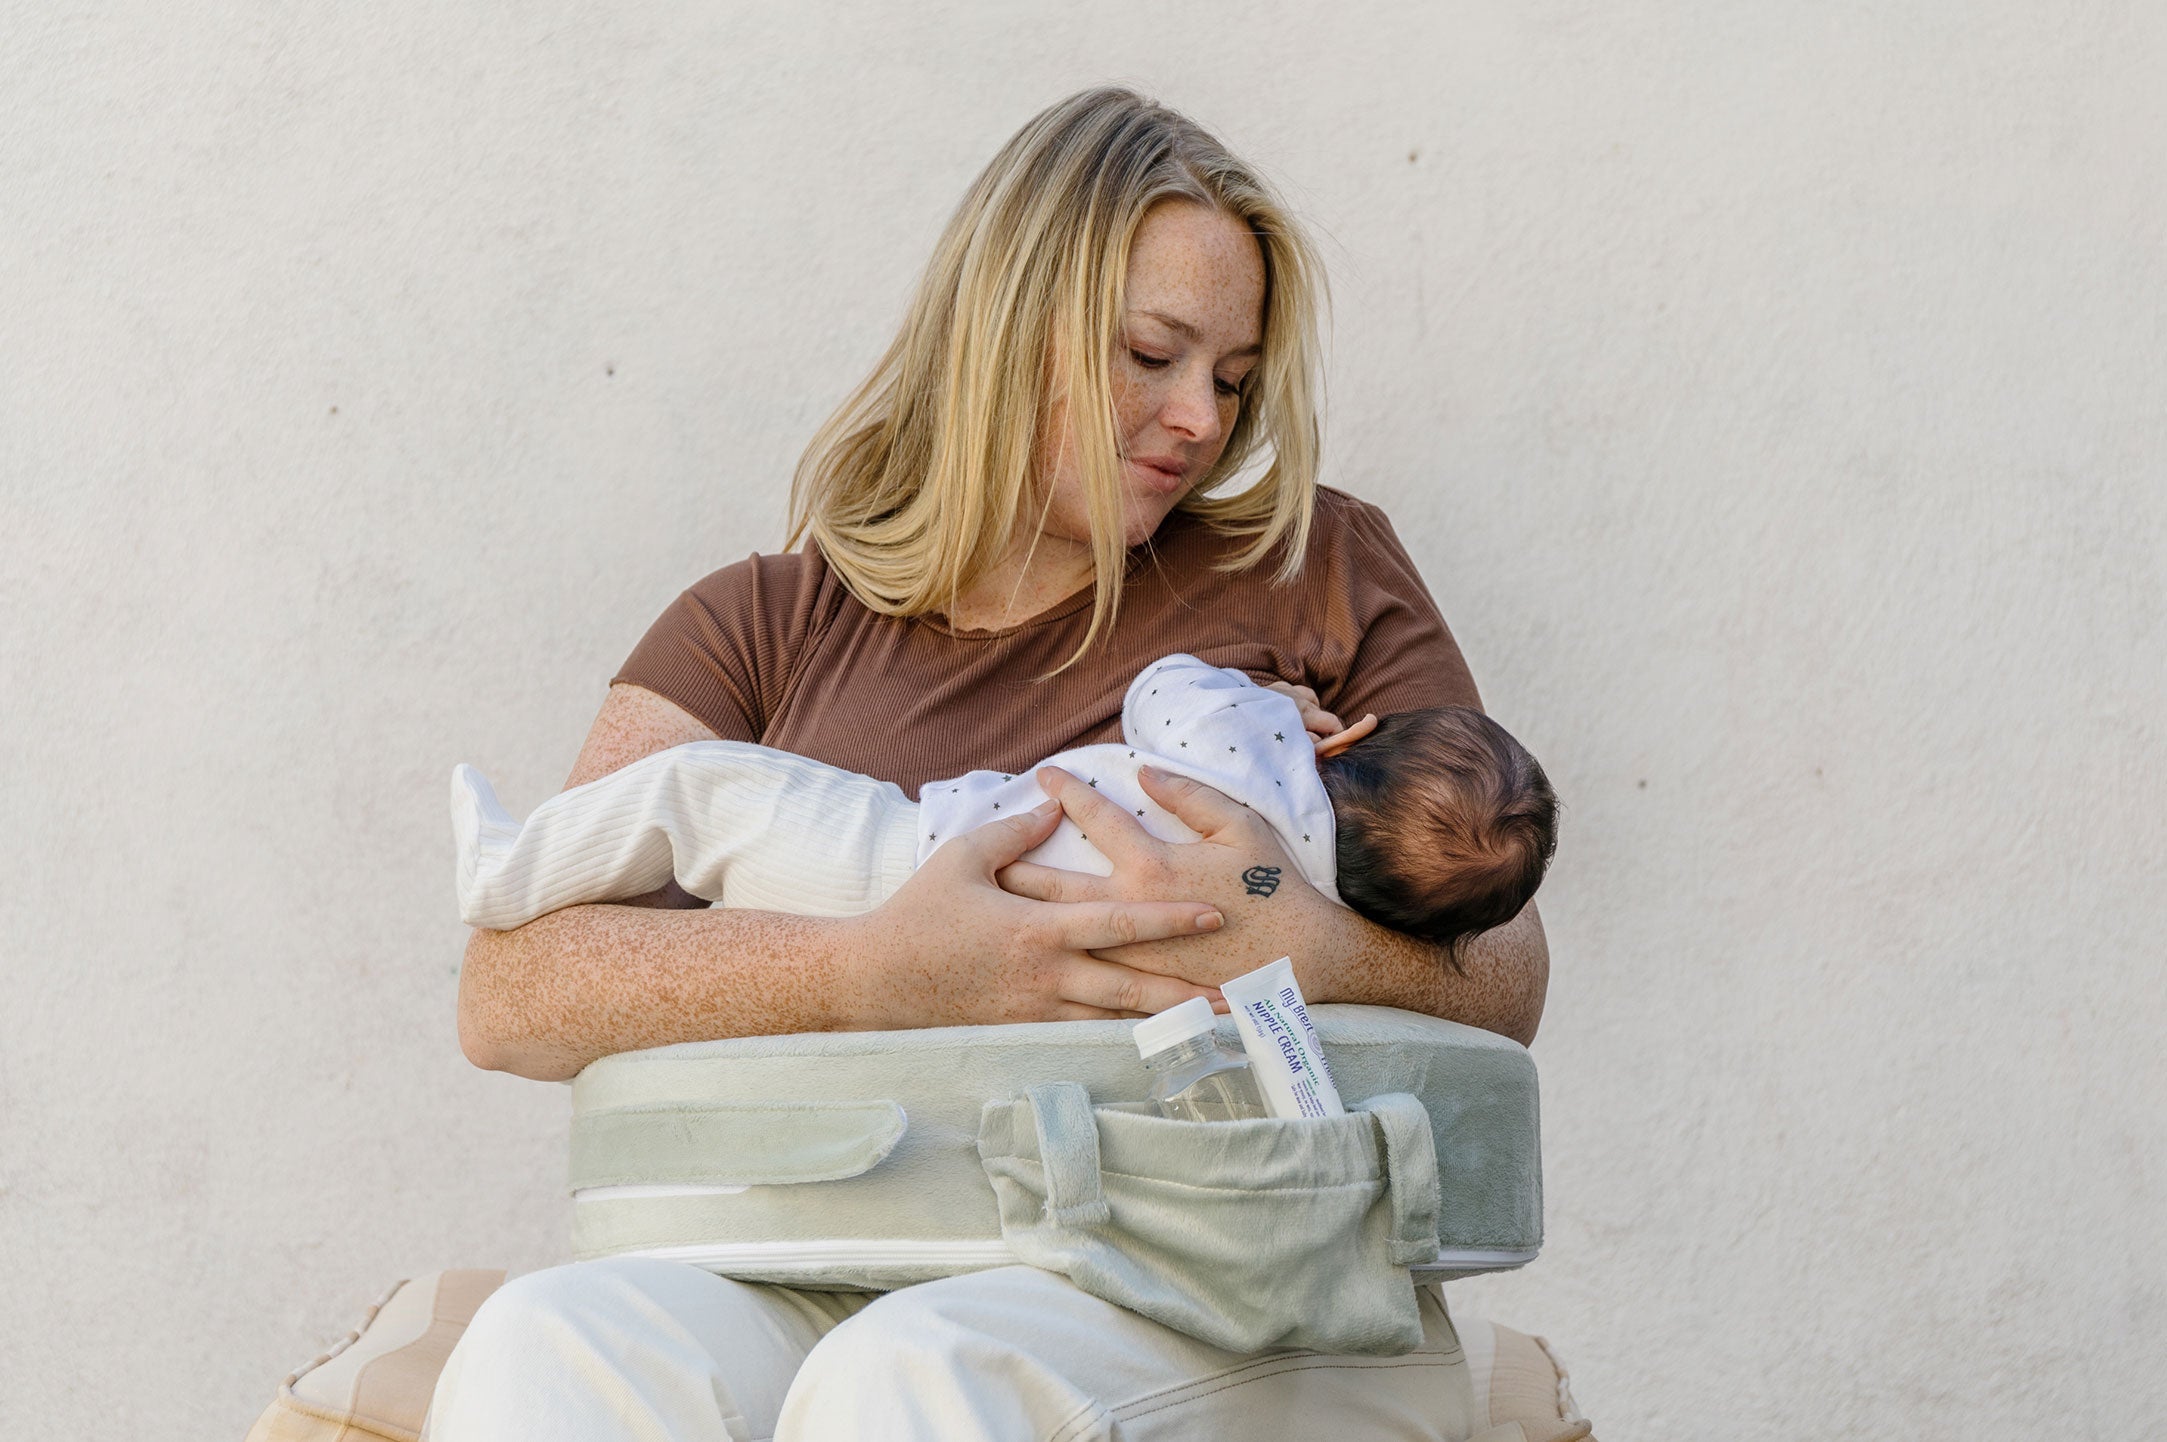 FIND OUT WHY THE MBF NURSING PILLOW IS CONSIDERED THE SAFEST BY NBC NEWS.